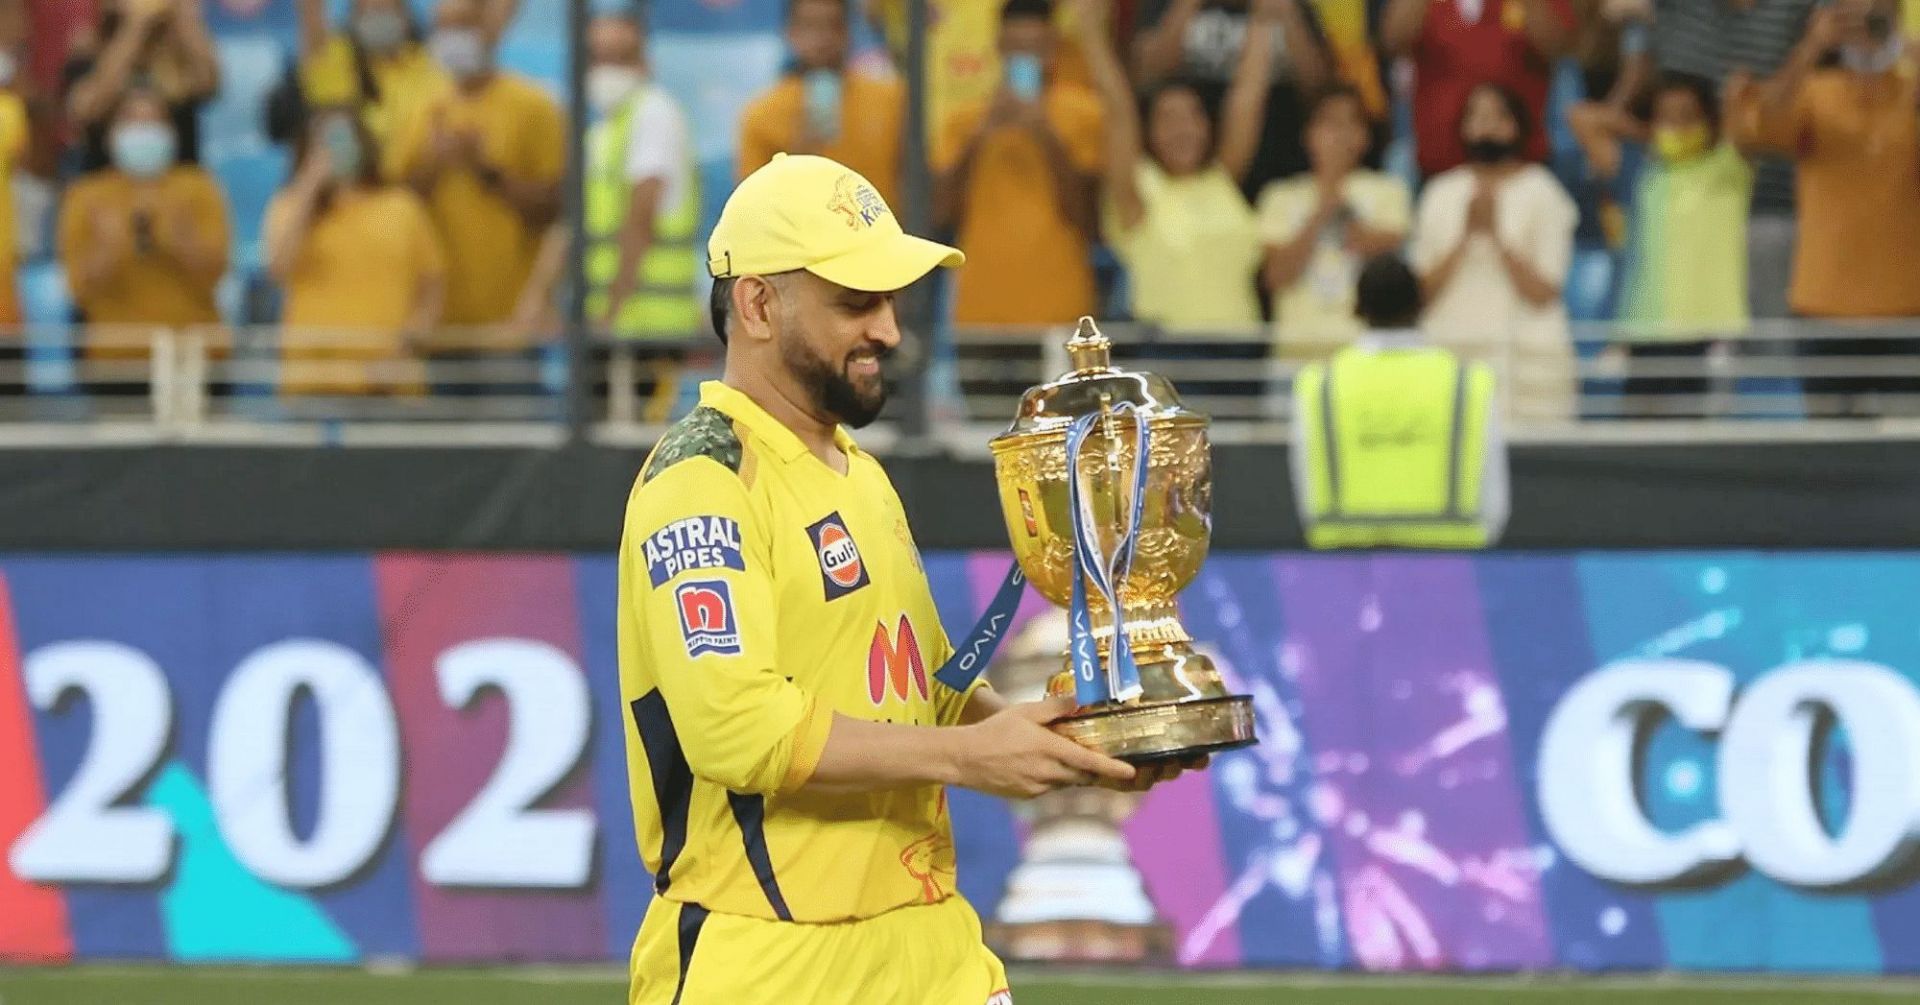 MS Dhoni led CSK to nine IPL finals, winning four of them [Image- Twitter]